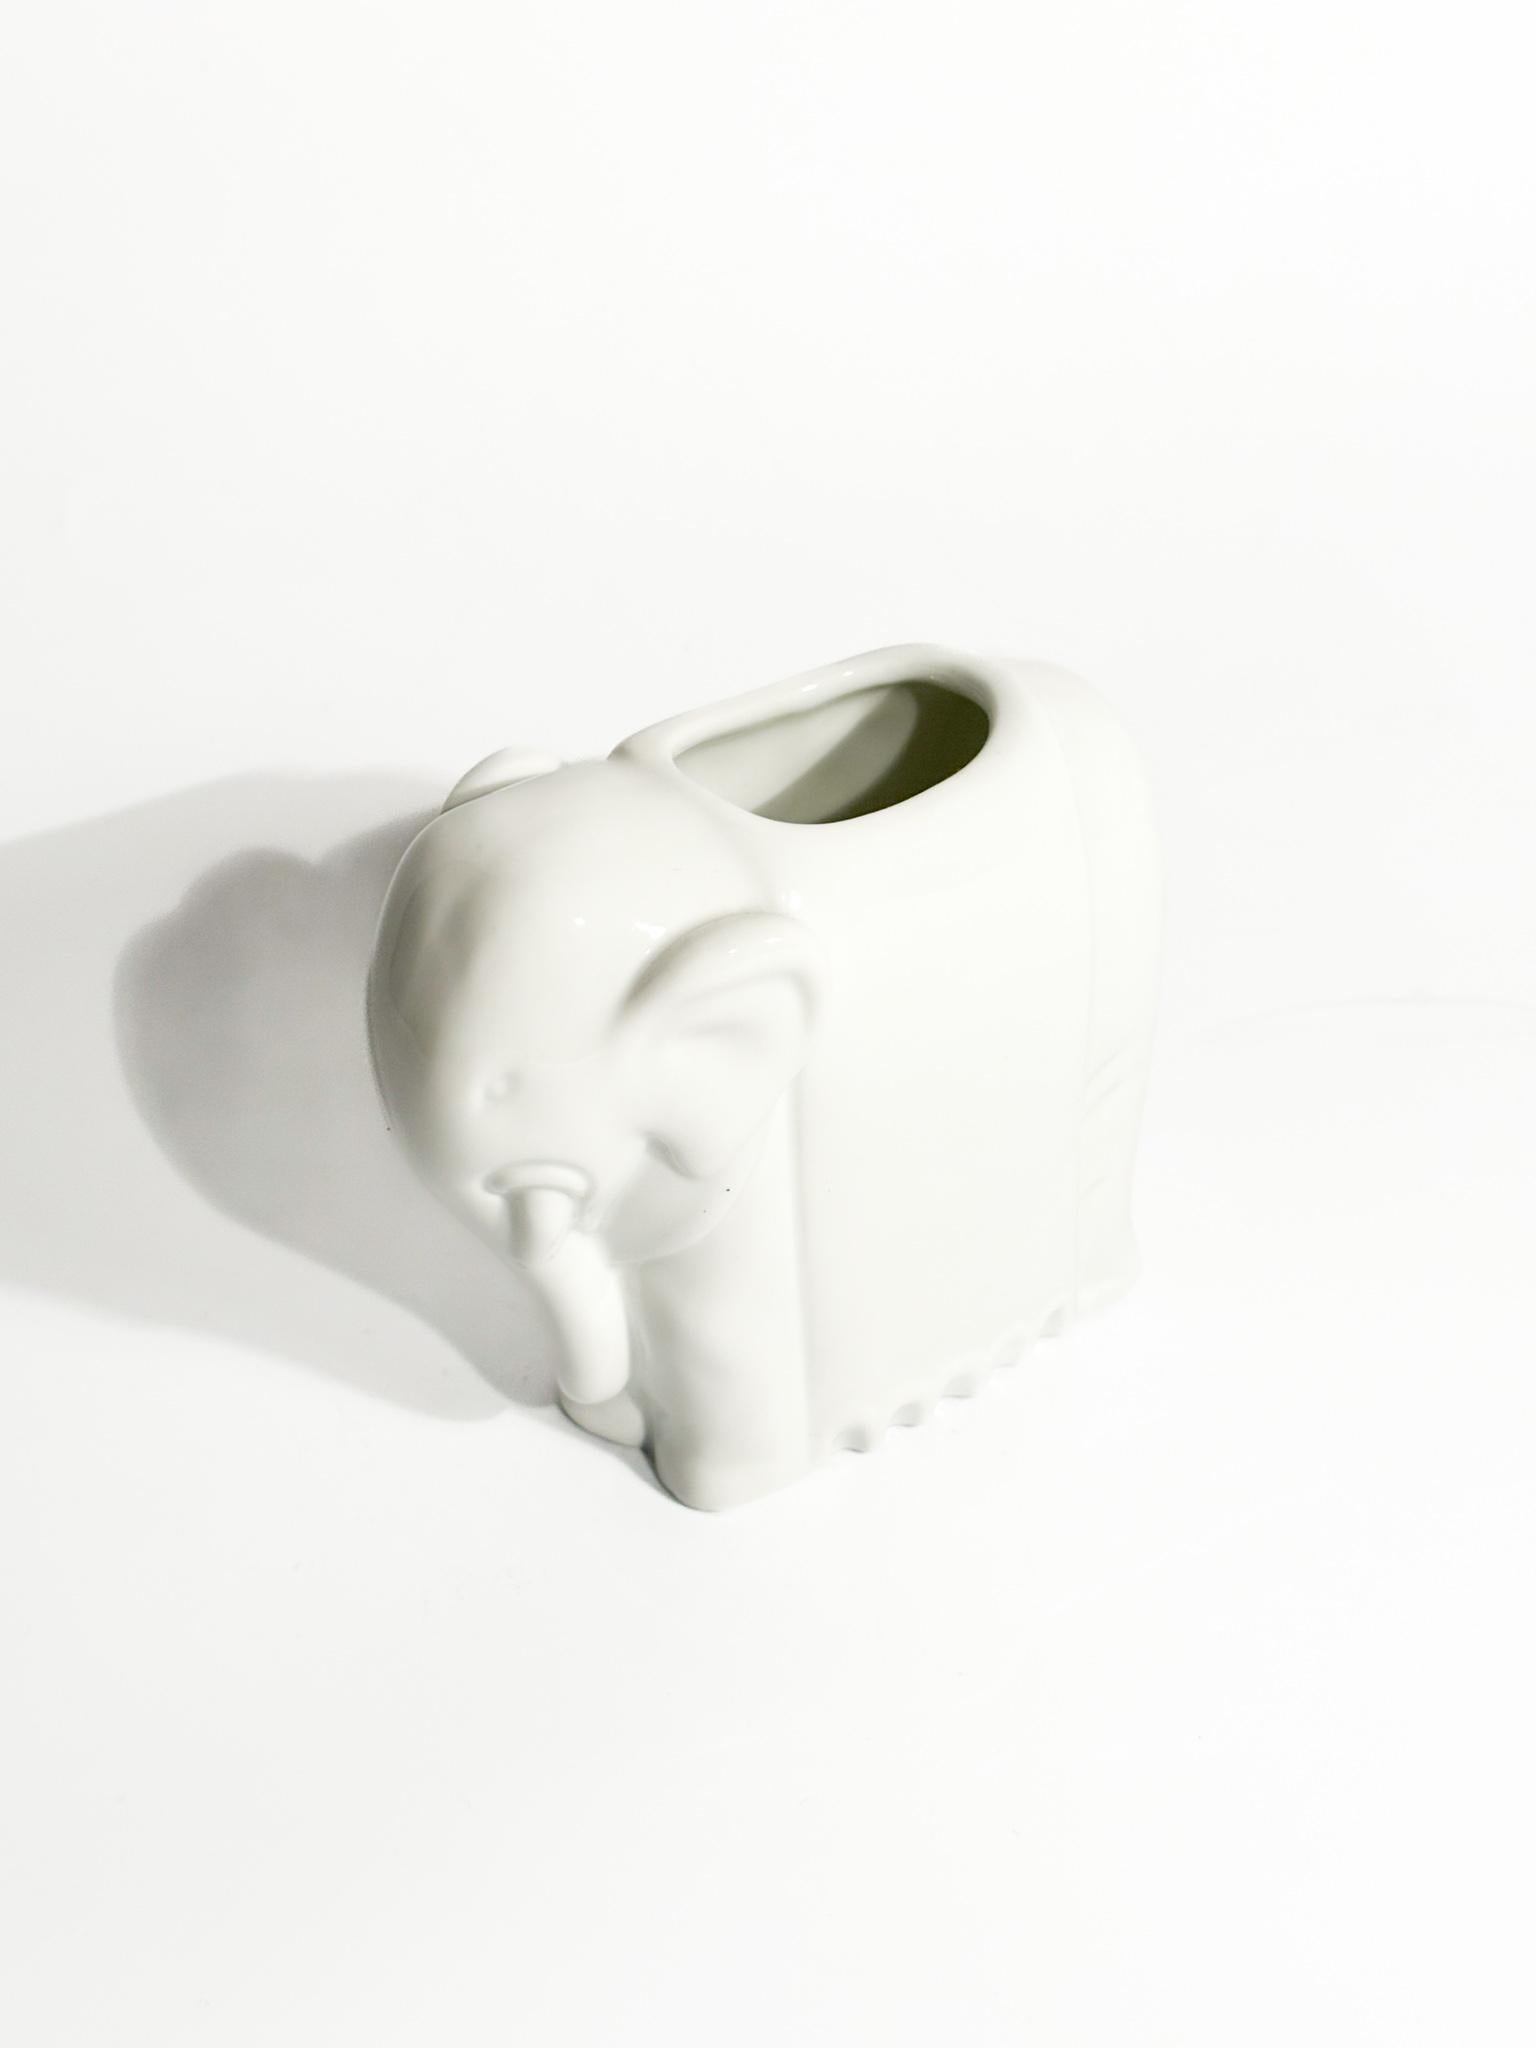 Late 20th Century White Elephant Vase Re-edition by Gio Ponti for Richard Ginori 1980s For Sale